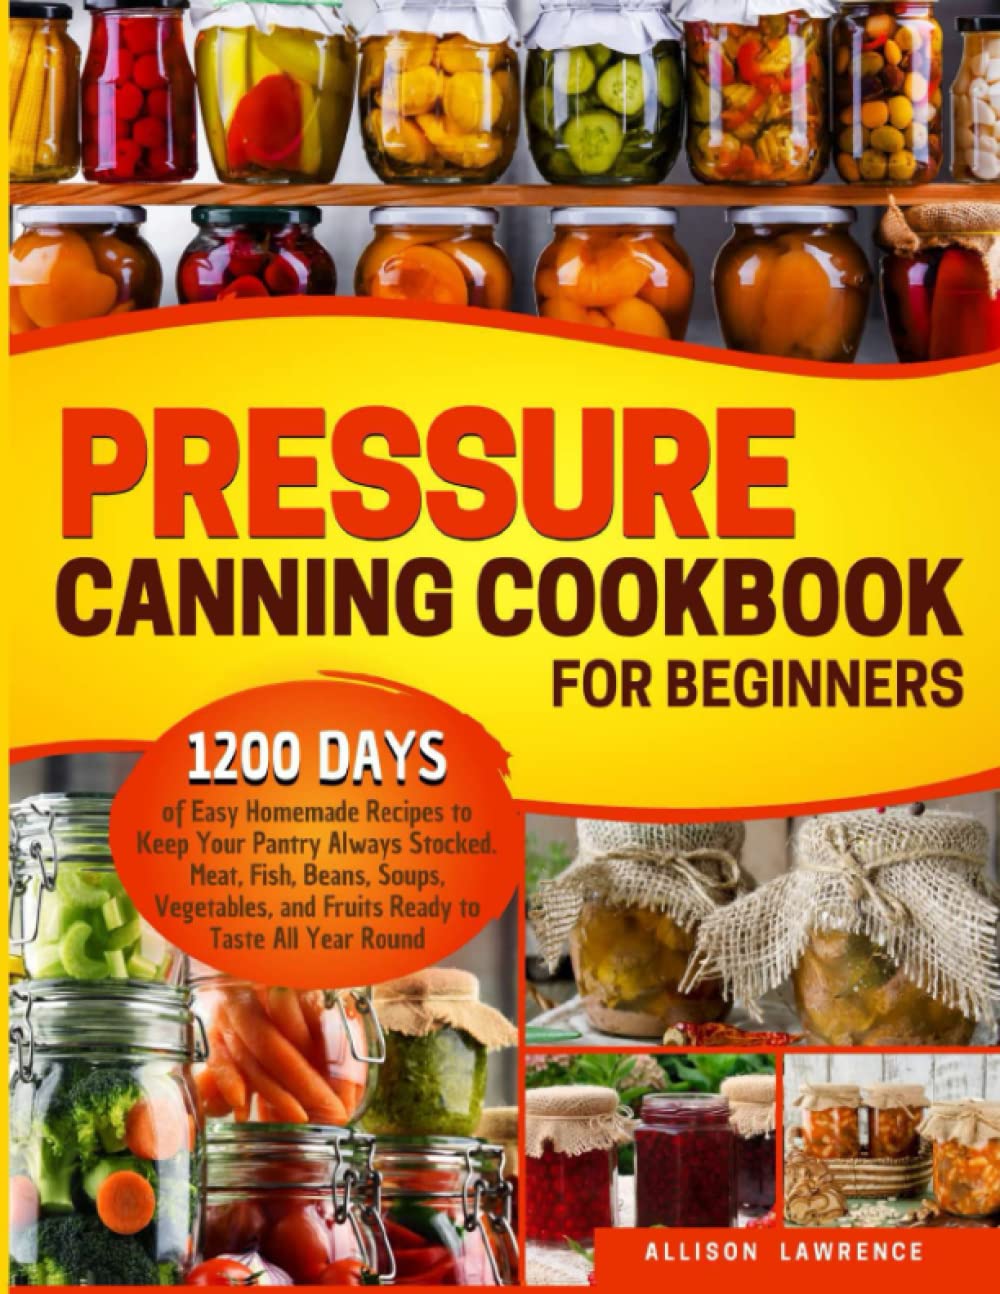 Pressure Canning Cookbook for Beginners: 1200 Days of Easy Homemade Recipes to Keep Your Pantry Always Stocked. Meat, Fish, Beans, Soups, Vegetables, and Fruits Ready to Taste All Year Round